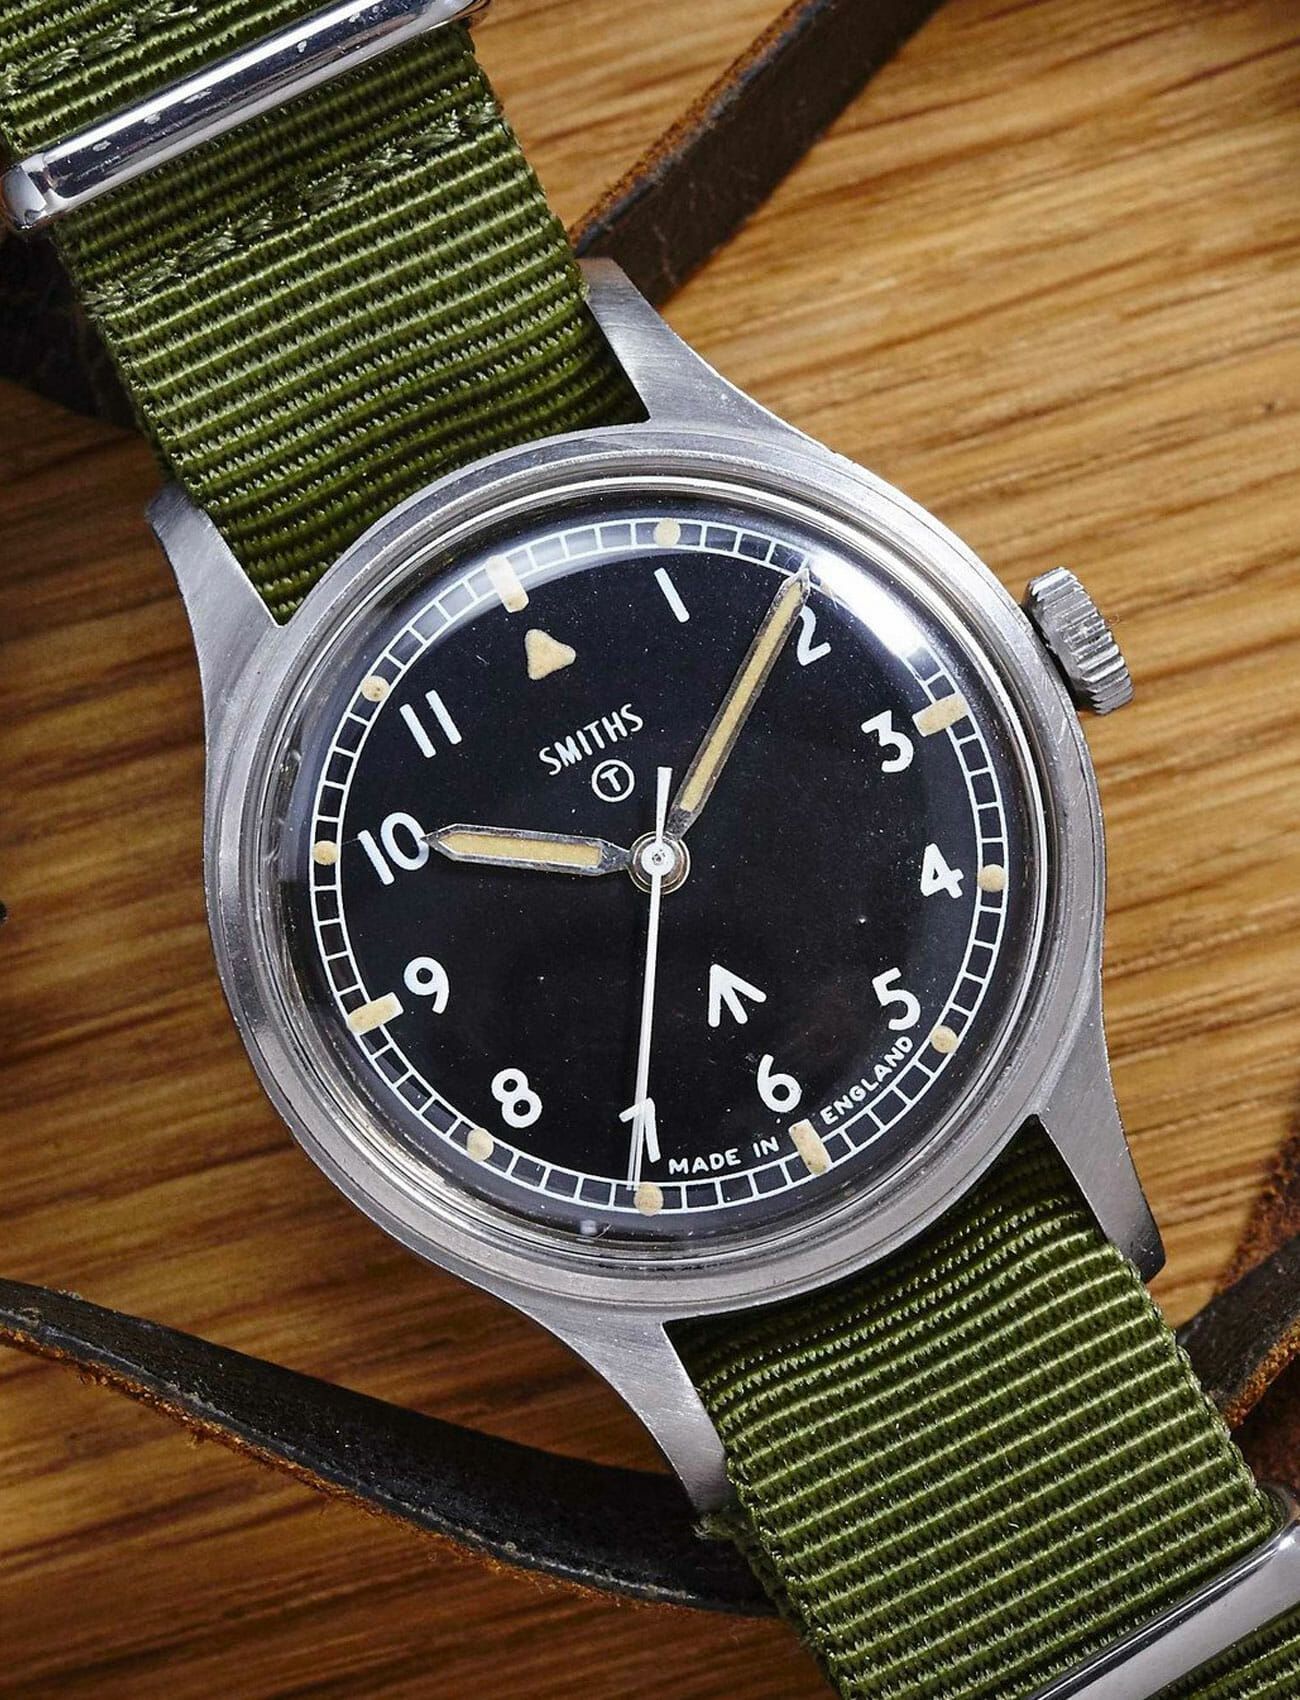 Us Military Watches | tunersread.com